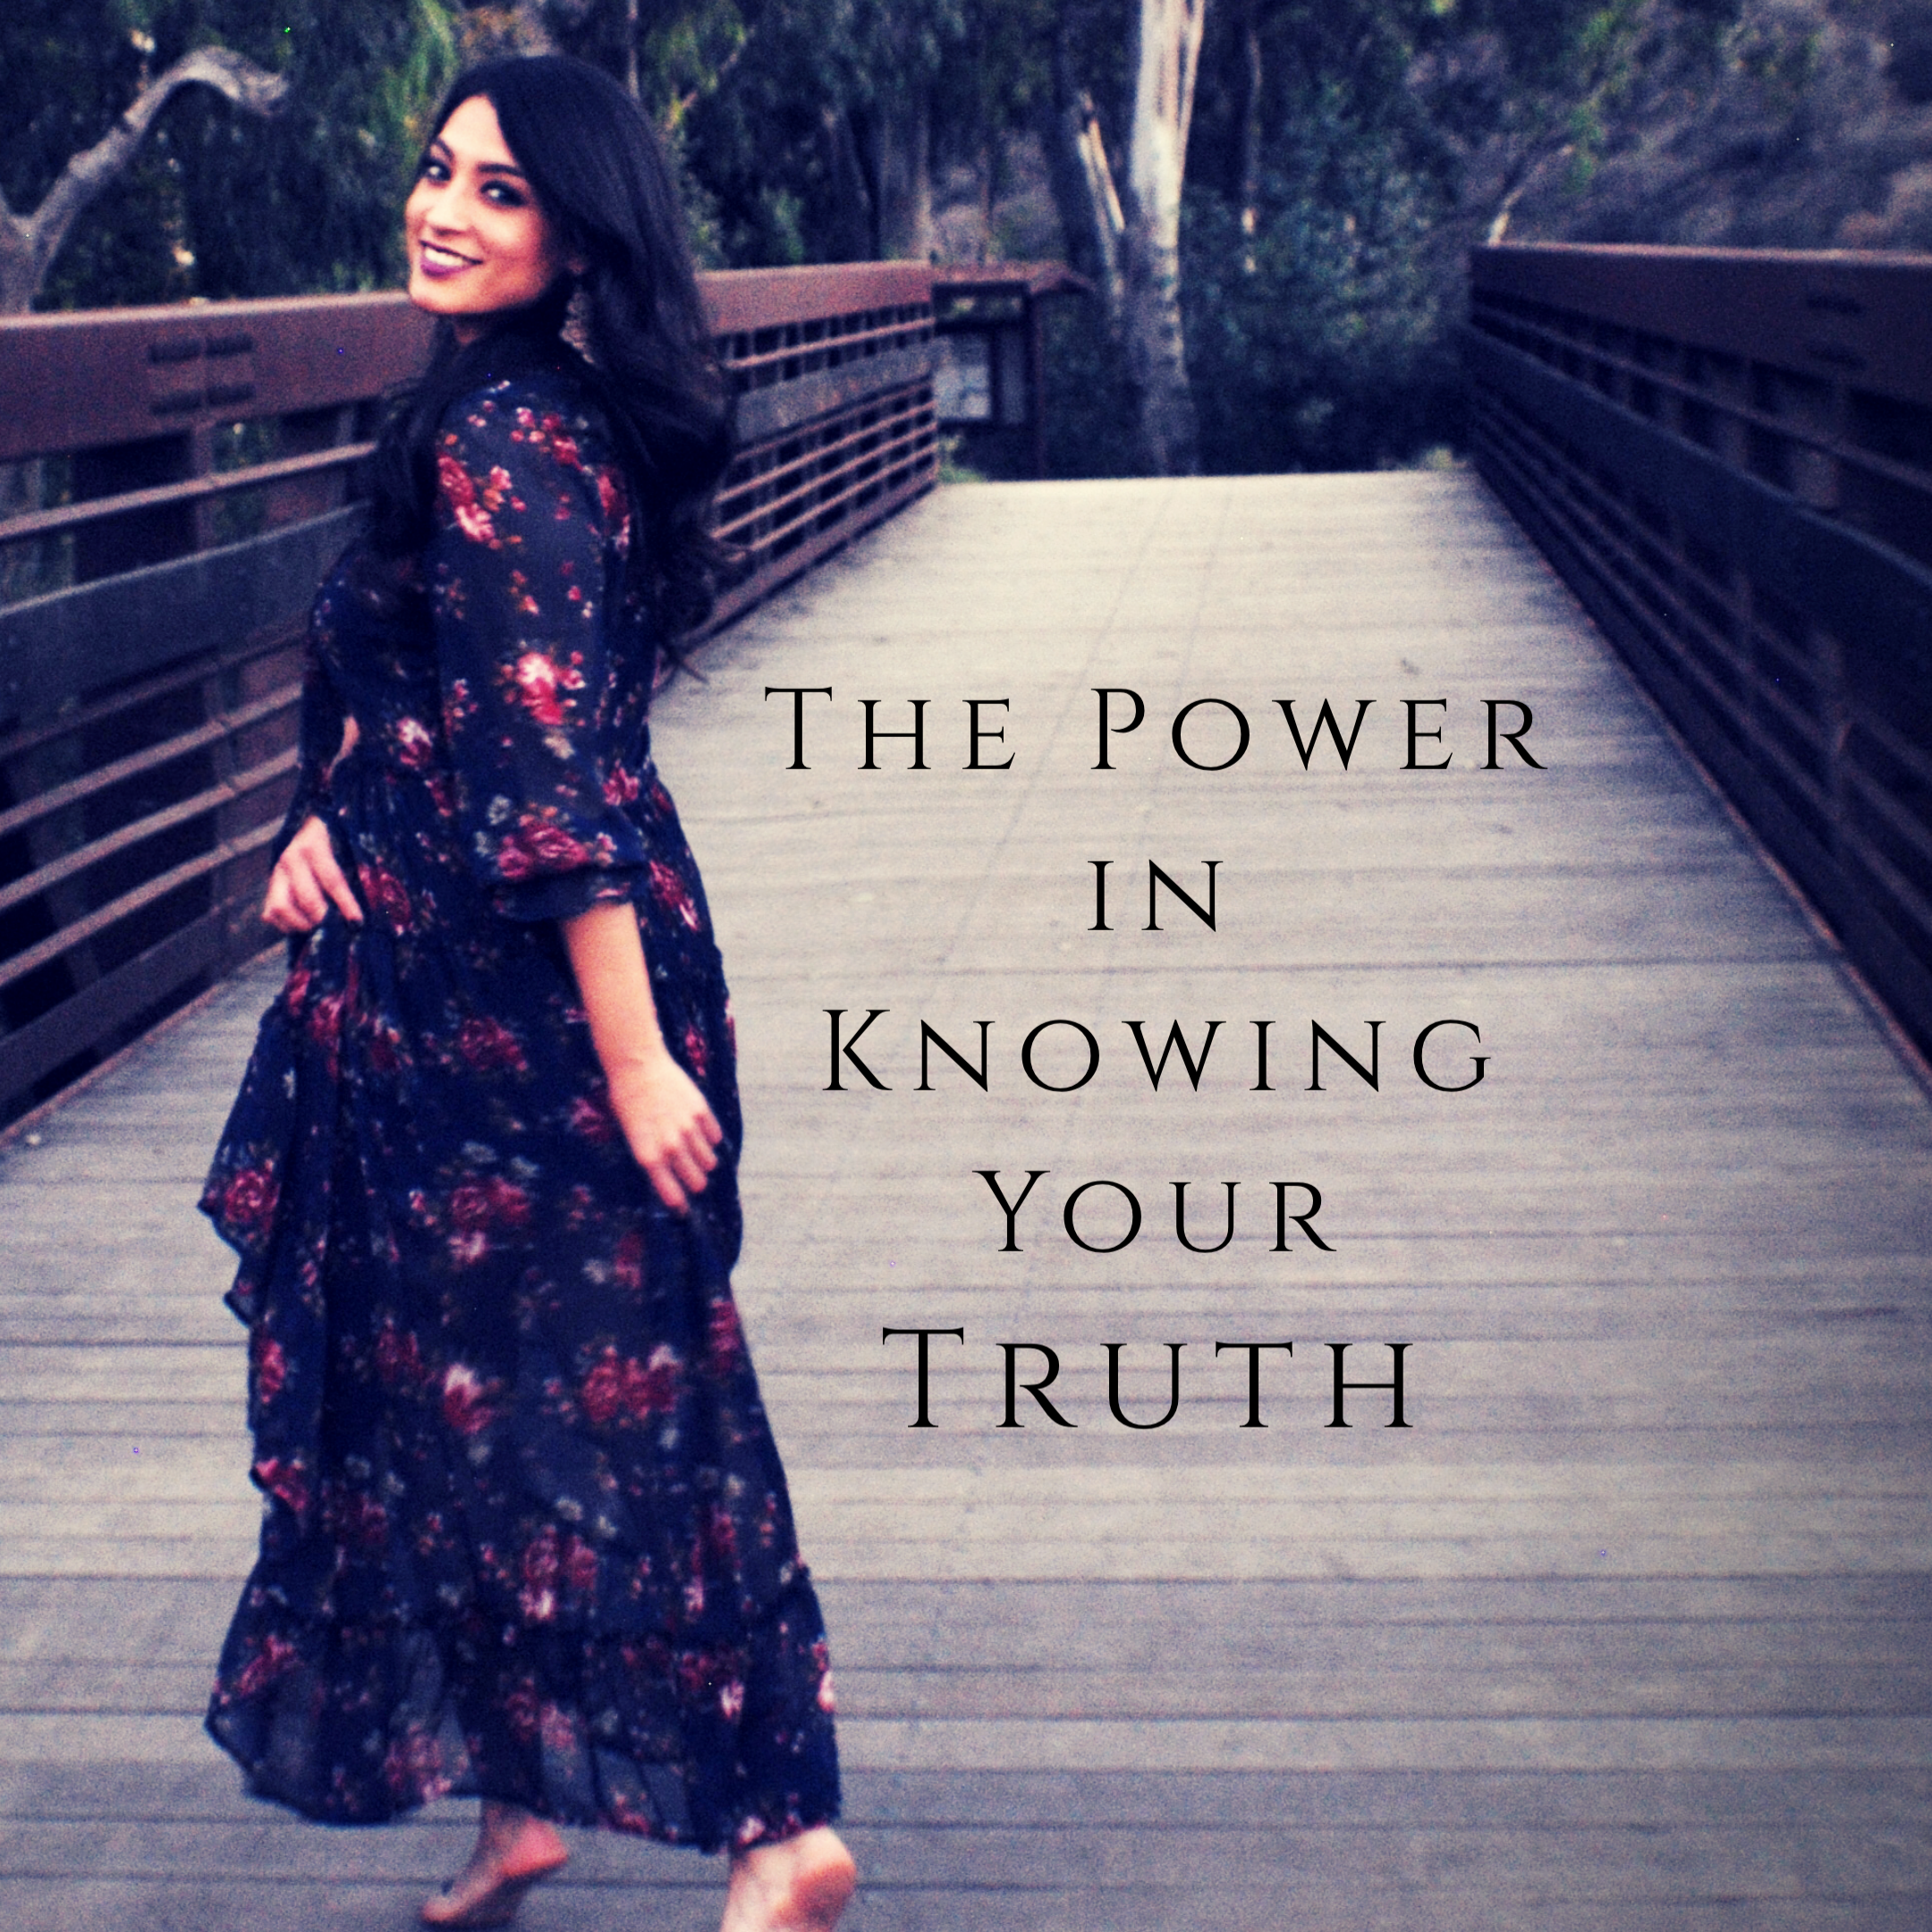 The Power in Knowing Your Truth